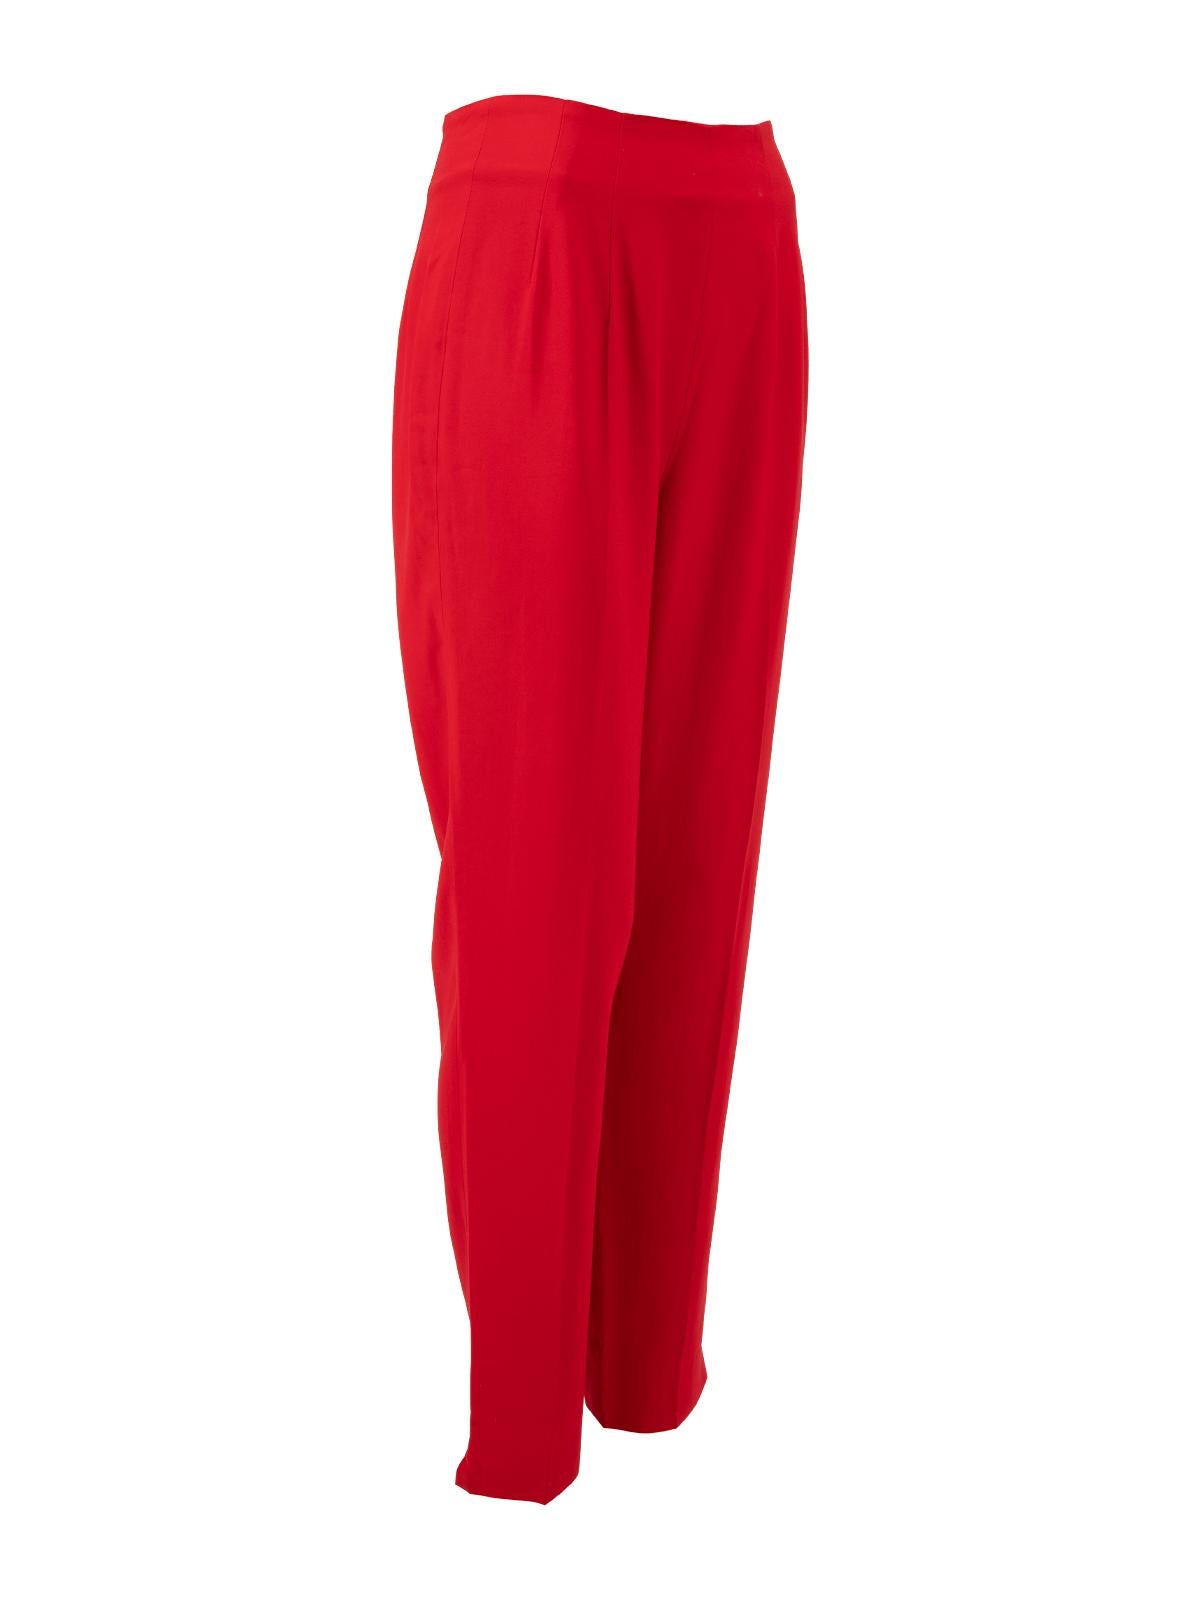 CONDITION is Very good. Hardly any visible wear to trousers is evident on this used Moschino Couture designer resale item. Details Red Synthetic Trousers Regular length High rise Straight leg Side zip closure with buttoned flap Made in Italy